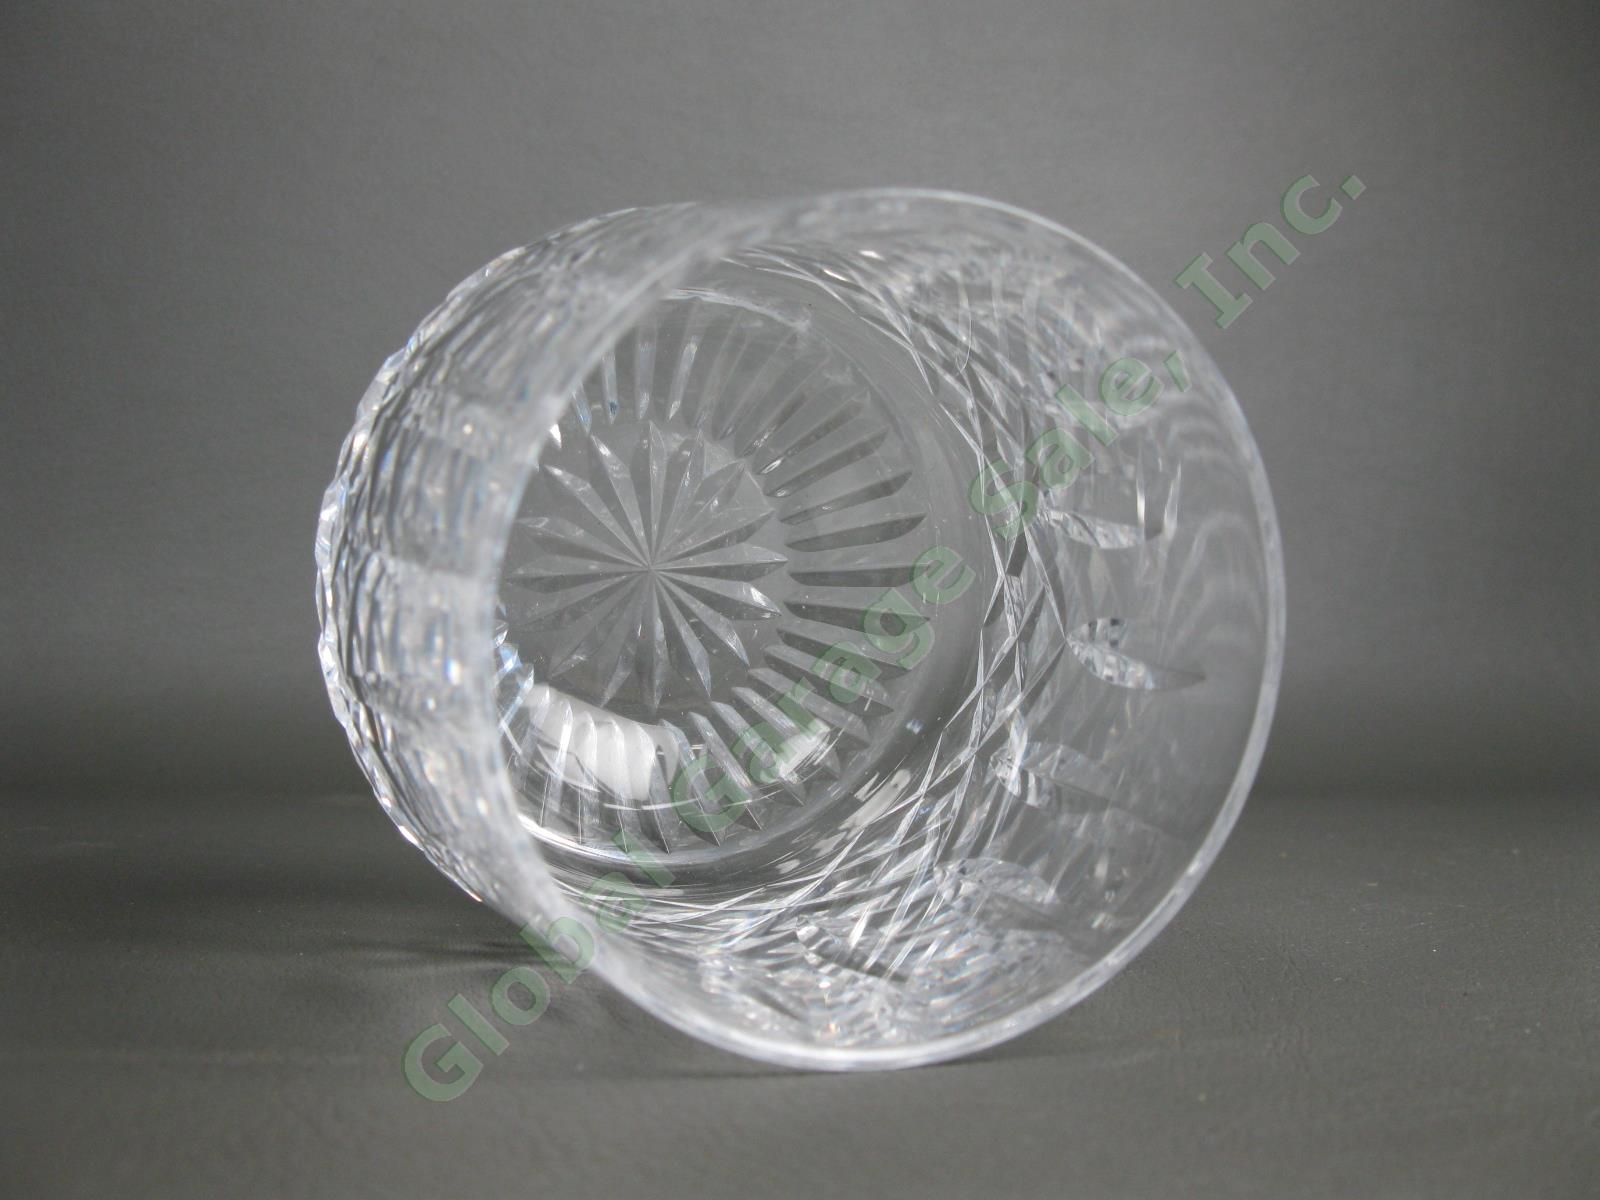 Original Waterford Crystal Lismore Roly Poly Old Fashioned Irish Whiskey Tumbler 2